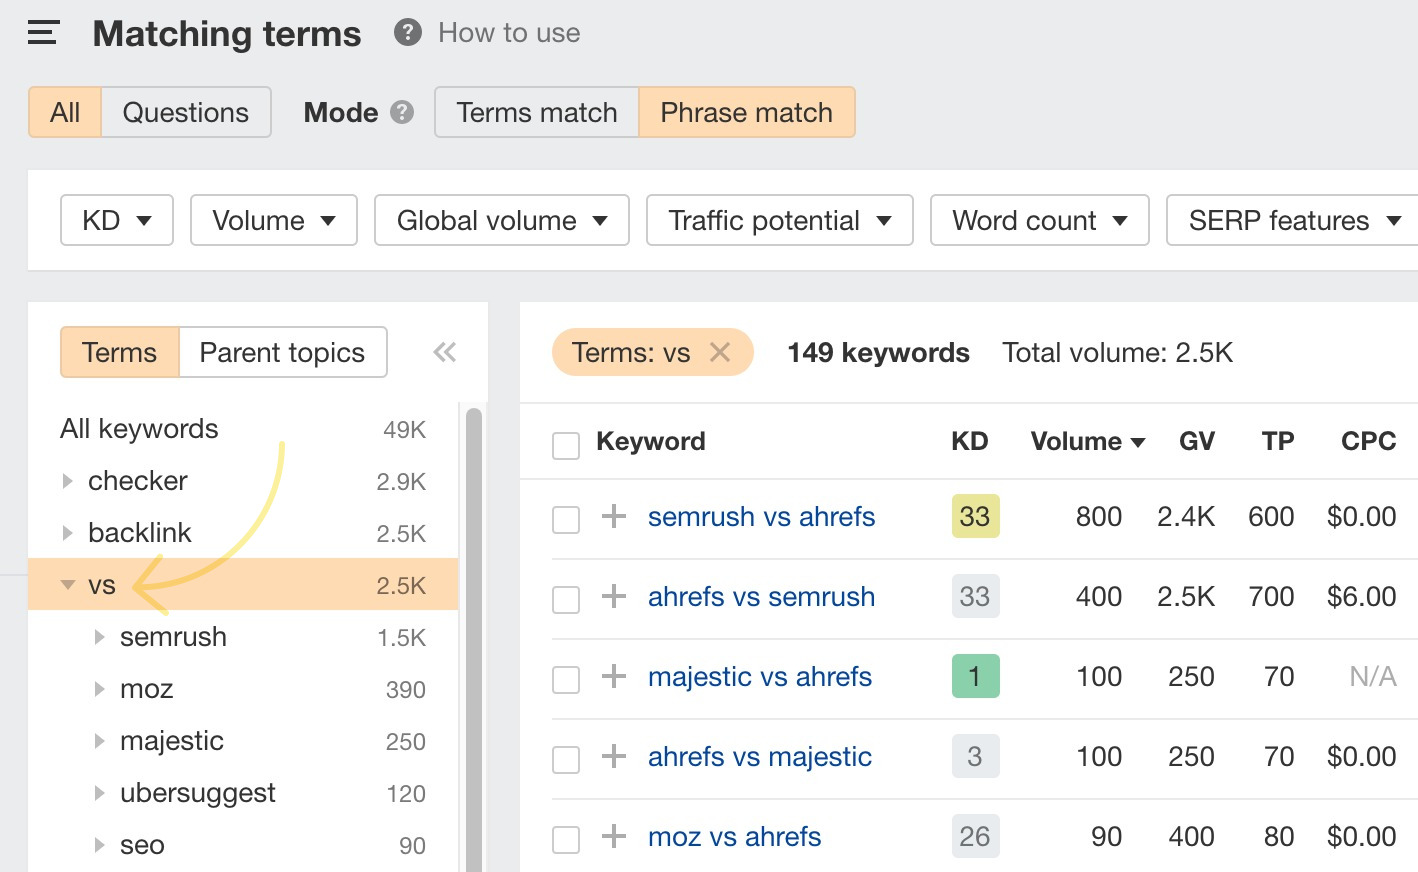 Matching terms report results. "vs" option in the sidebar